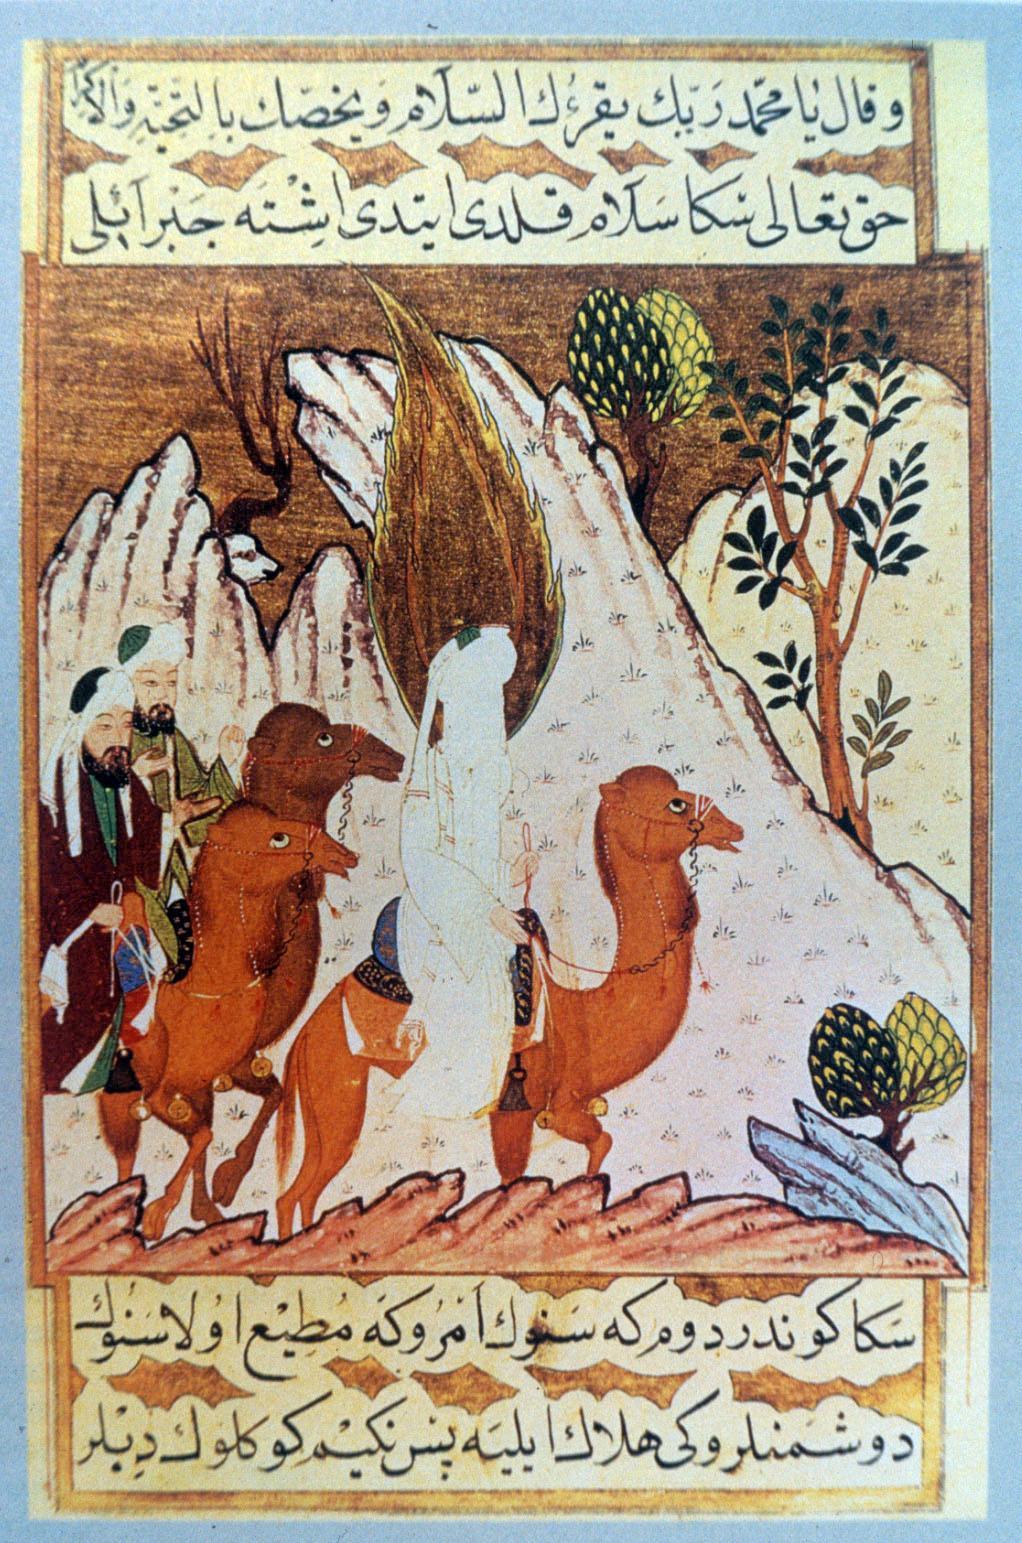 DOCUMENT F The Prophet Muhammad and His Companions Traveling to the Fair, from a copy of the 14th-century Siyar-i Nabi (Life of the Prophet) of al-zarir, Istanbul, Turkey. 1594.